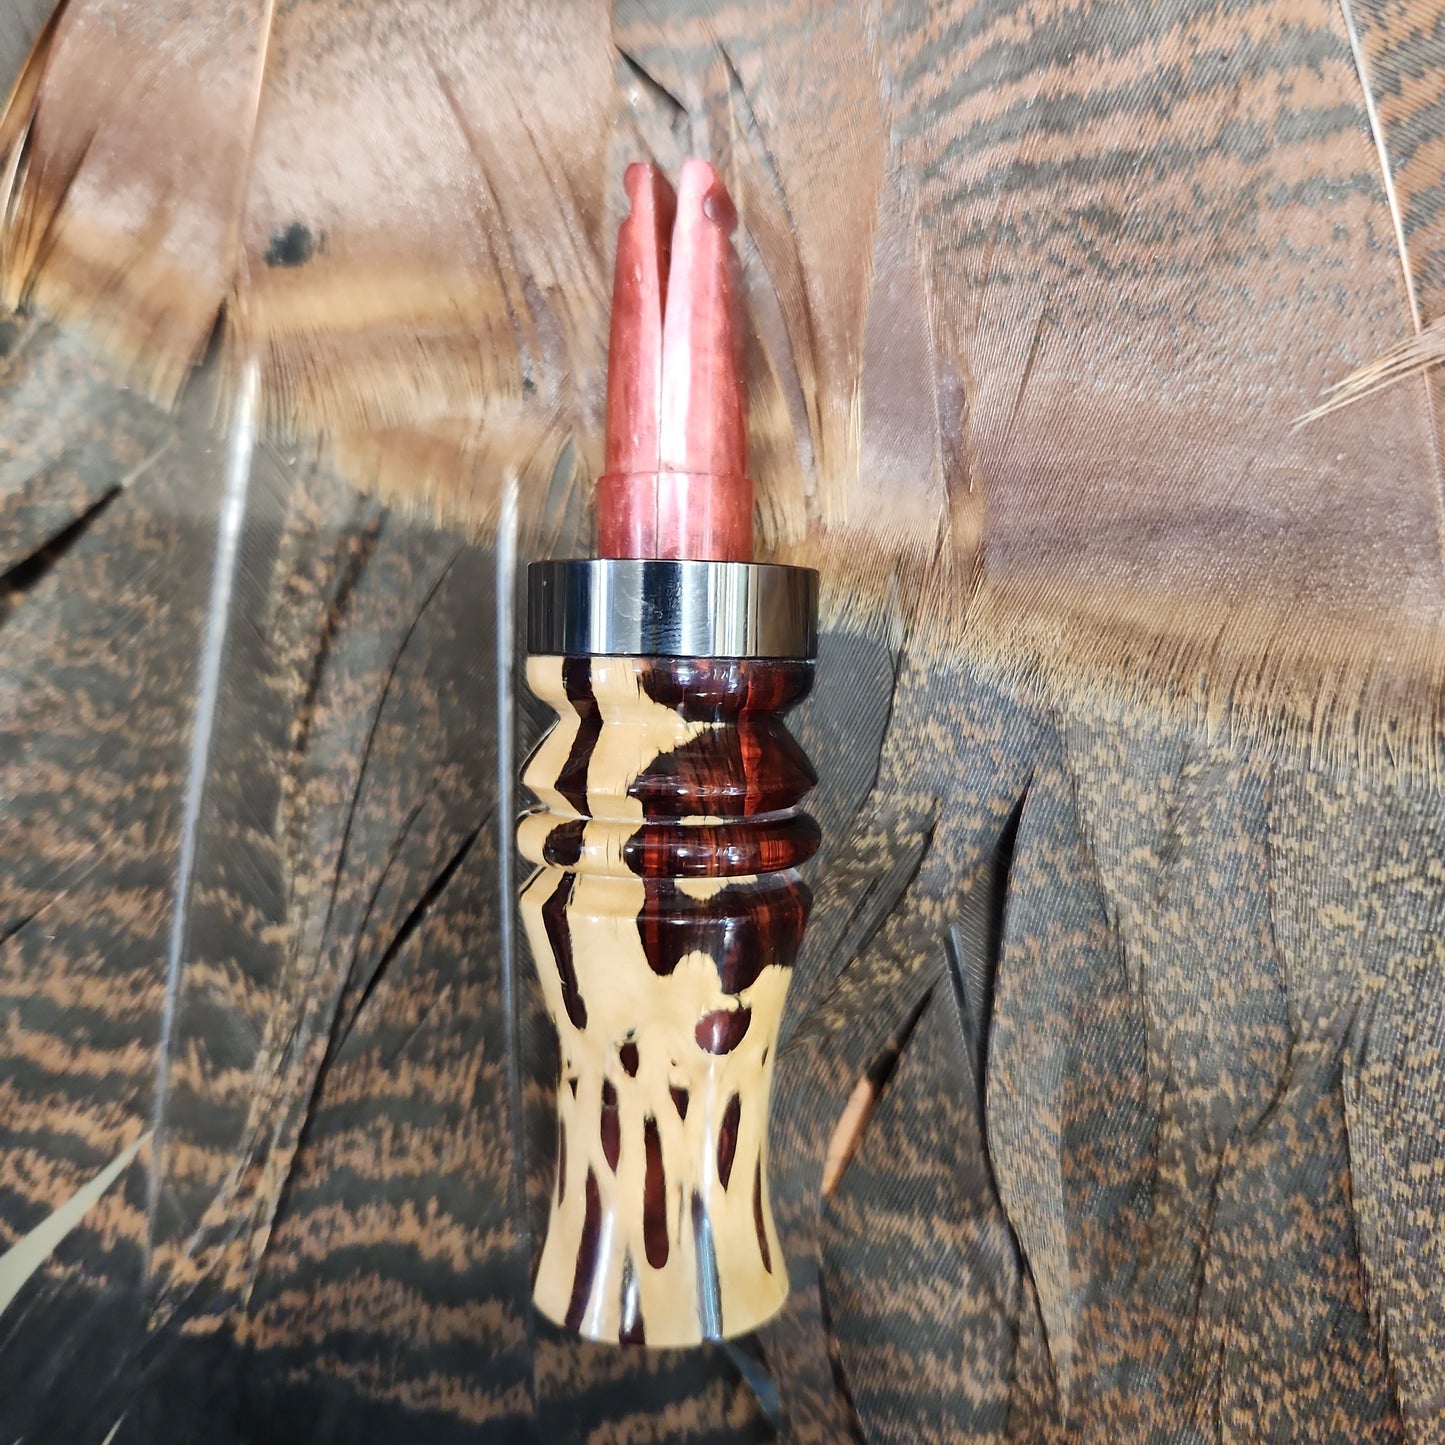 Nor'Easter Crow call blood red resin cholla cactus